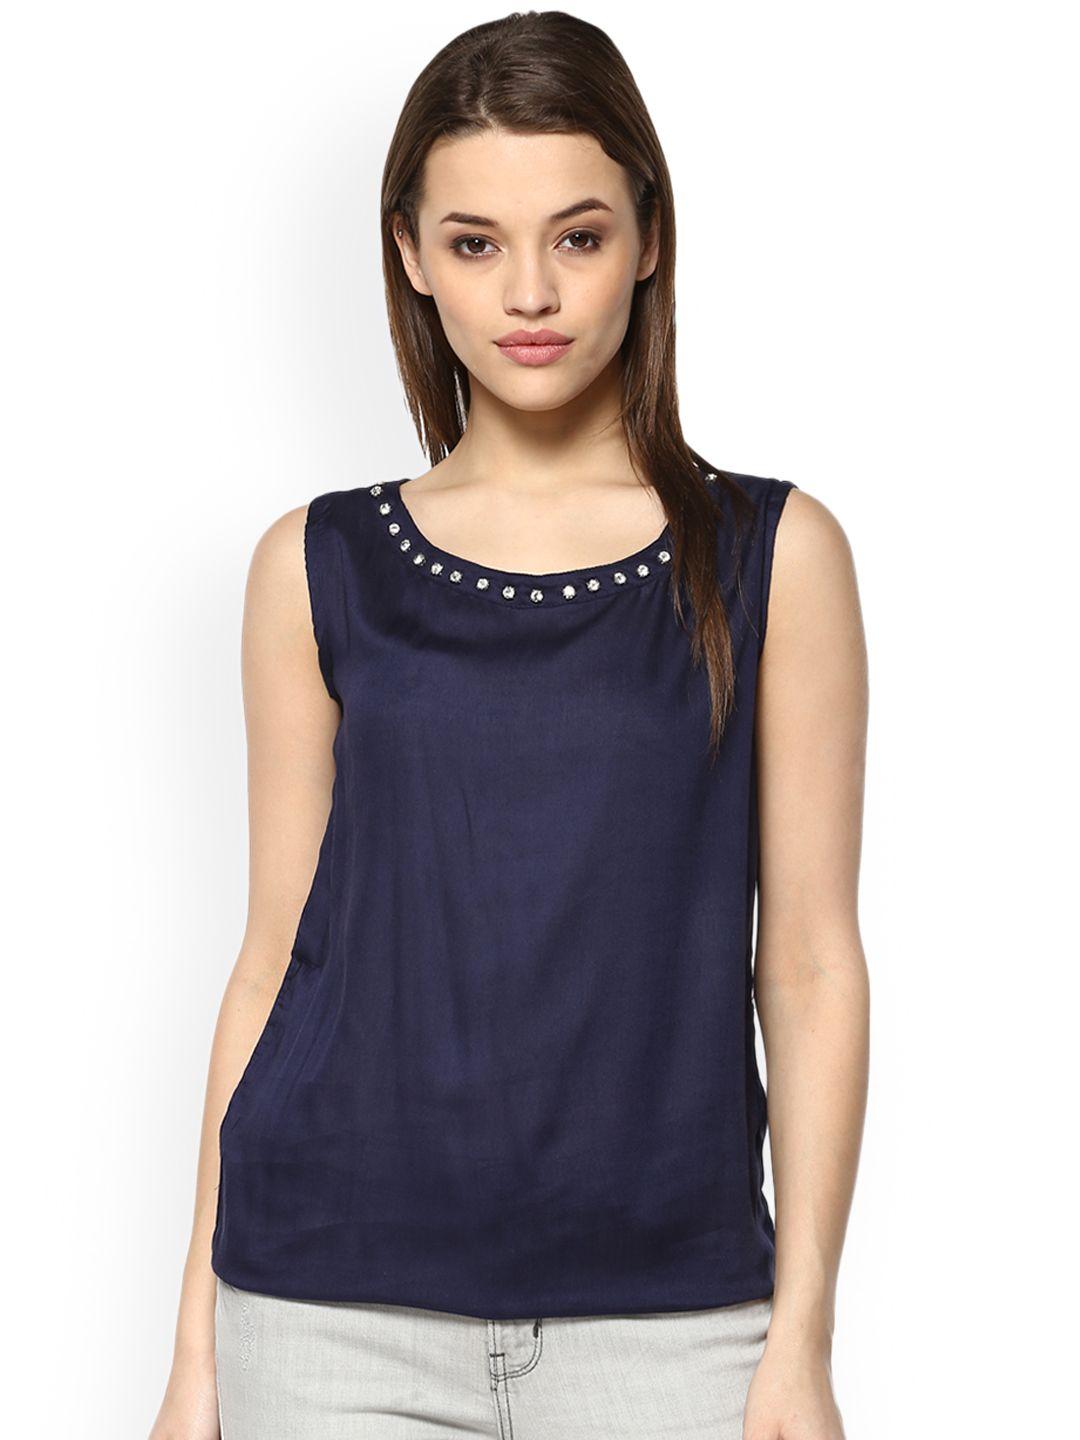 mayra women navy blue solid top